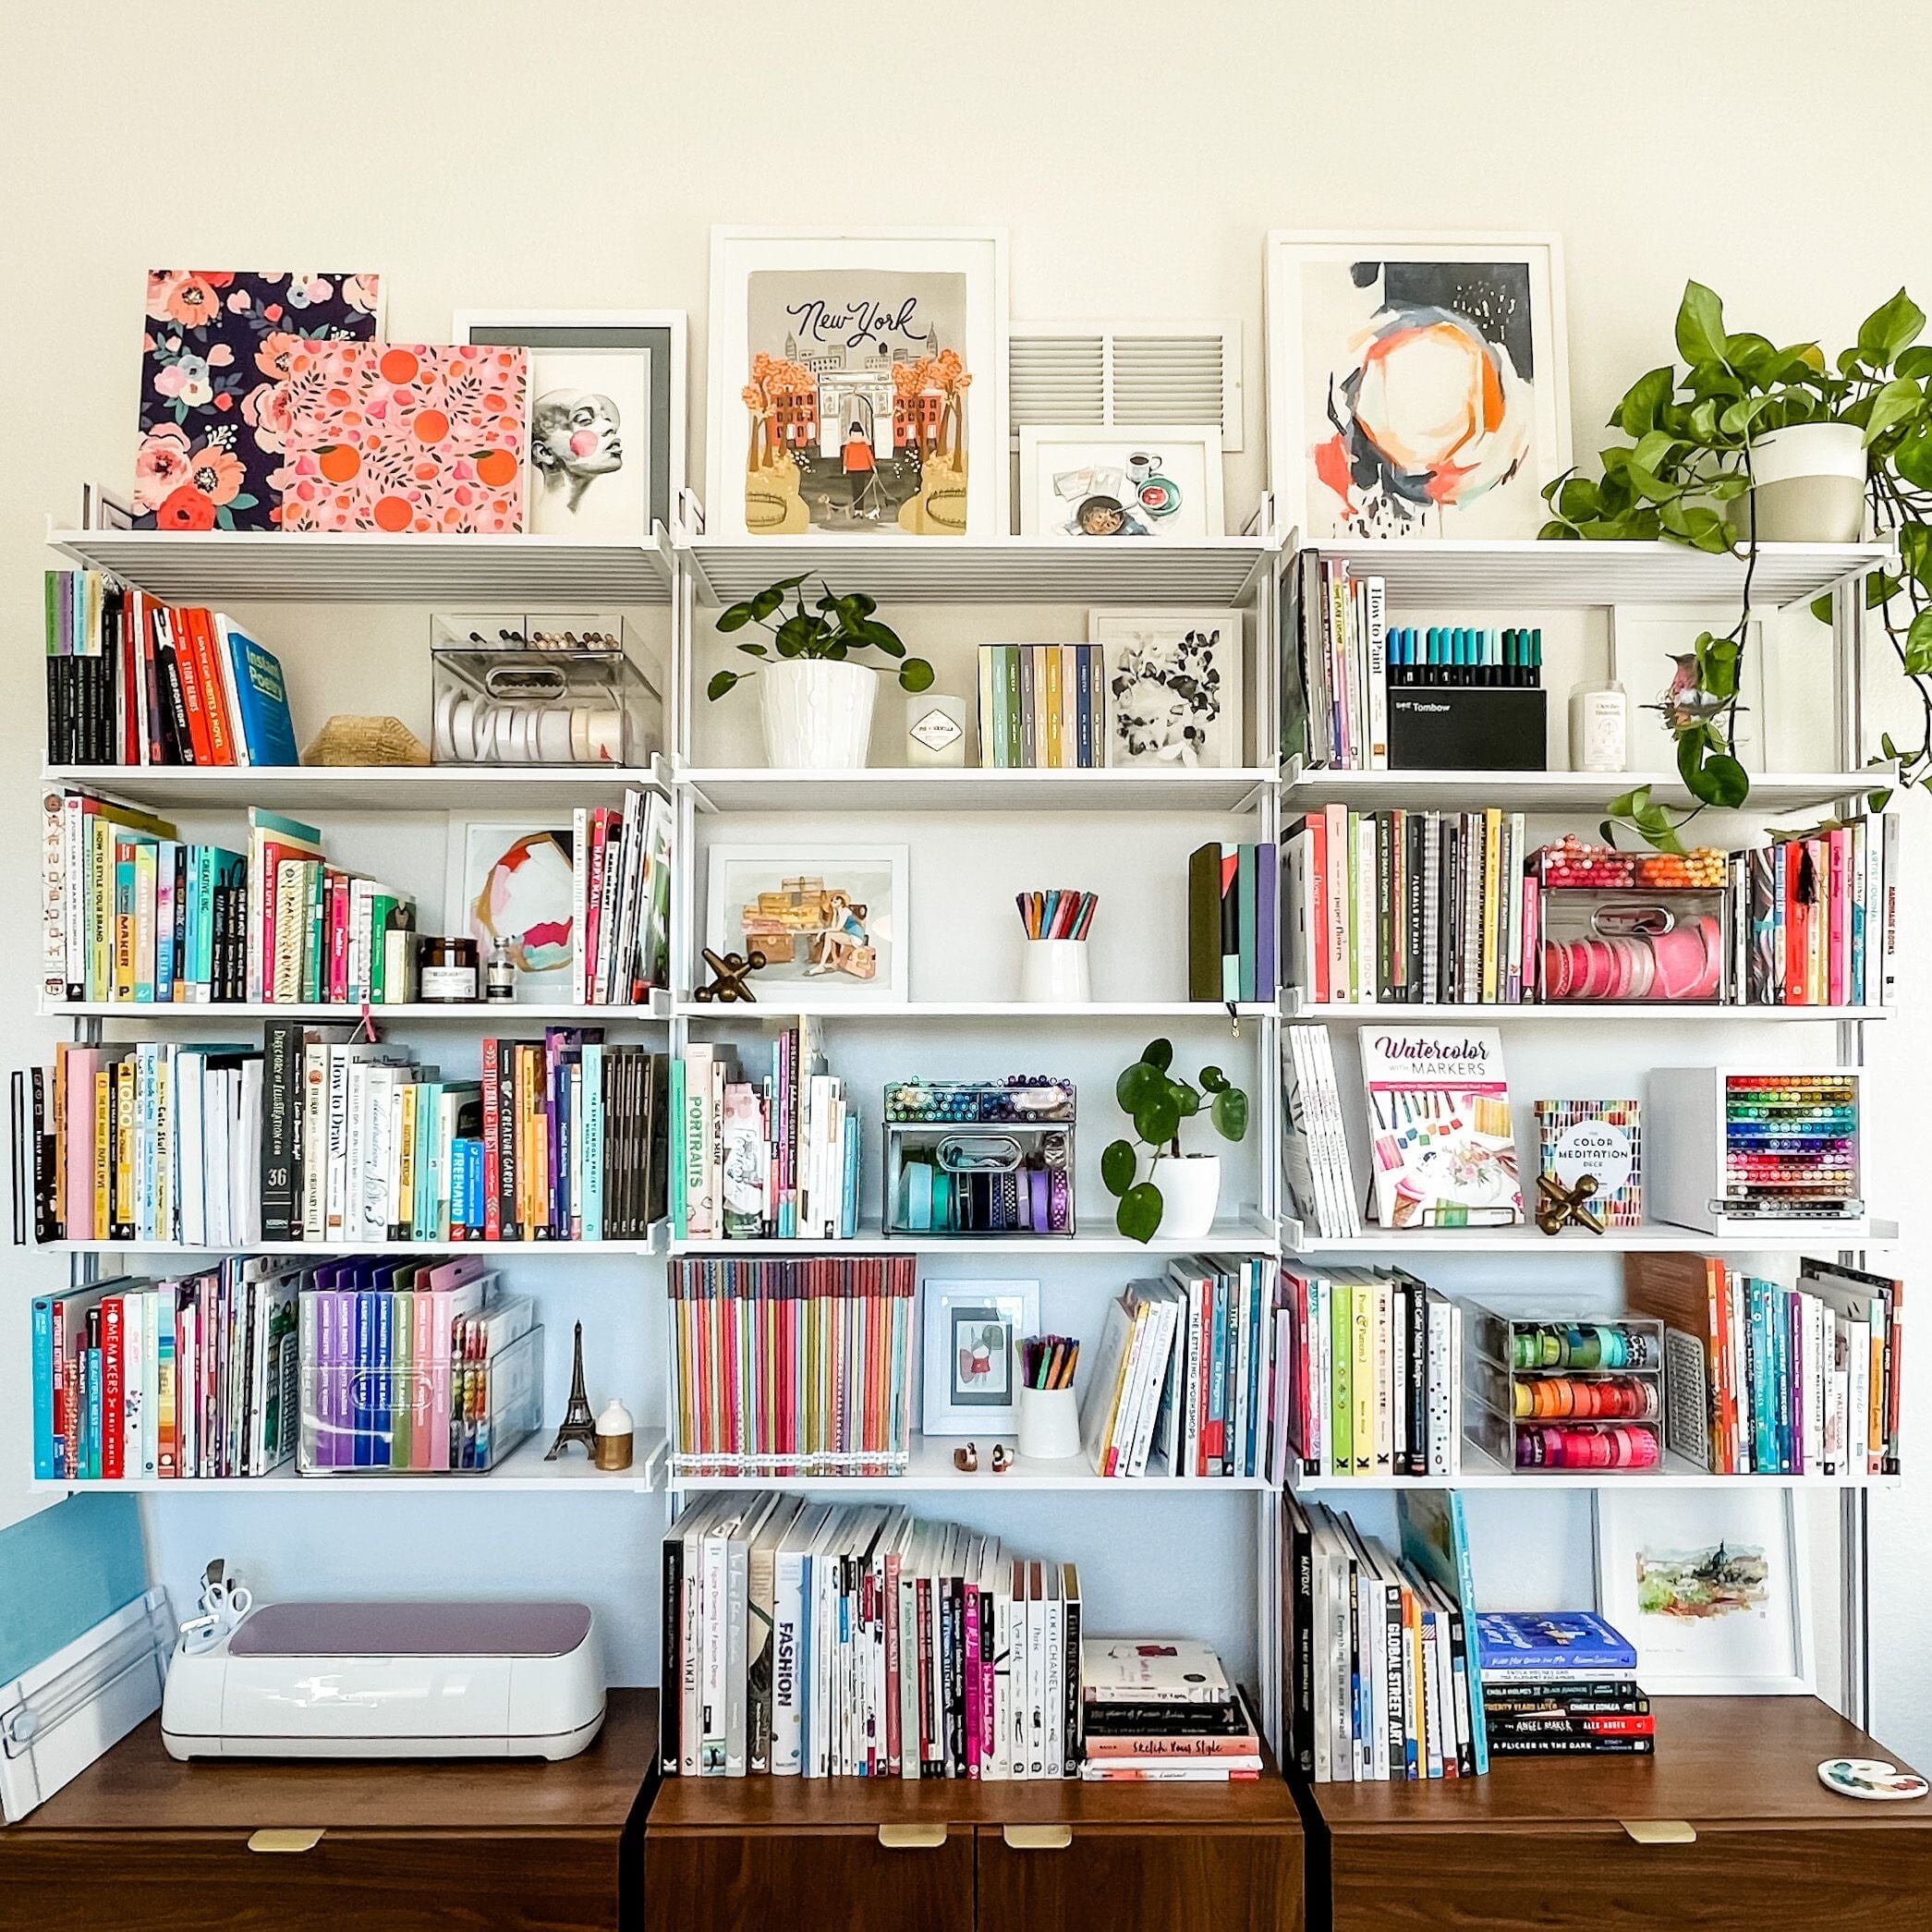 Custom Shelves Used to Complete Home Office Space